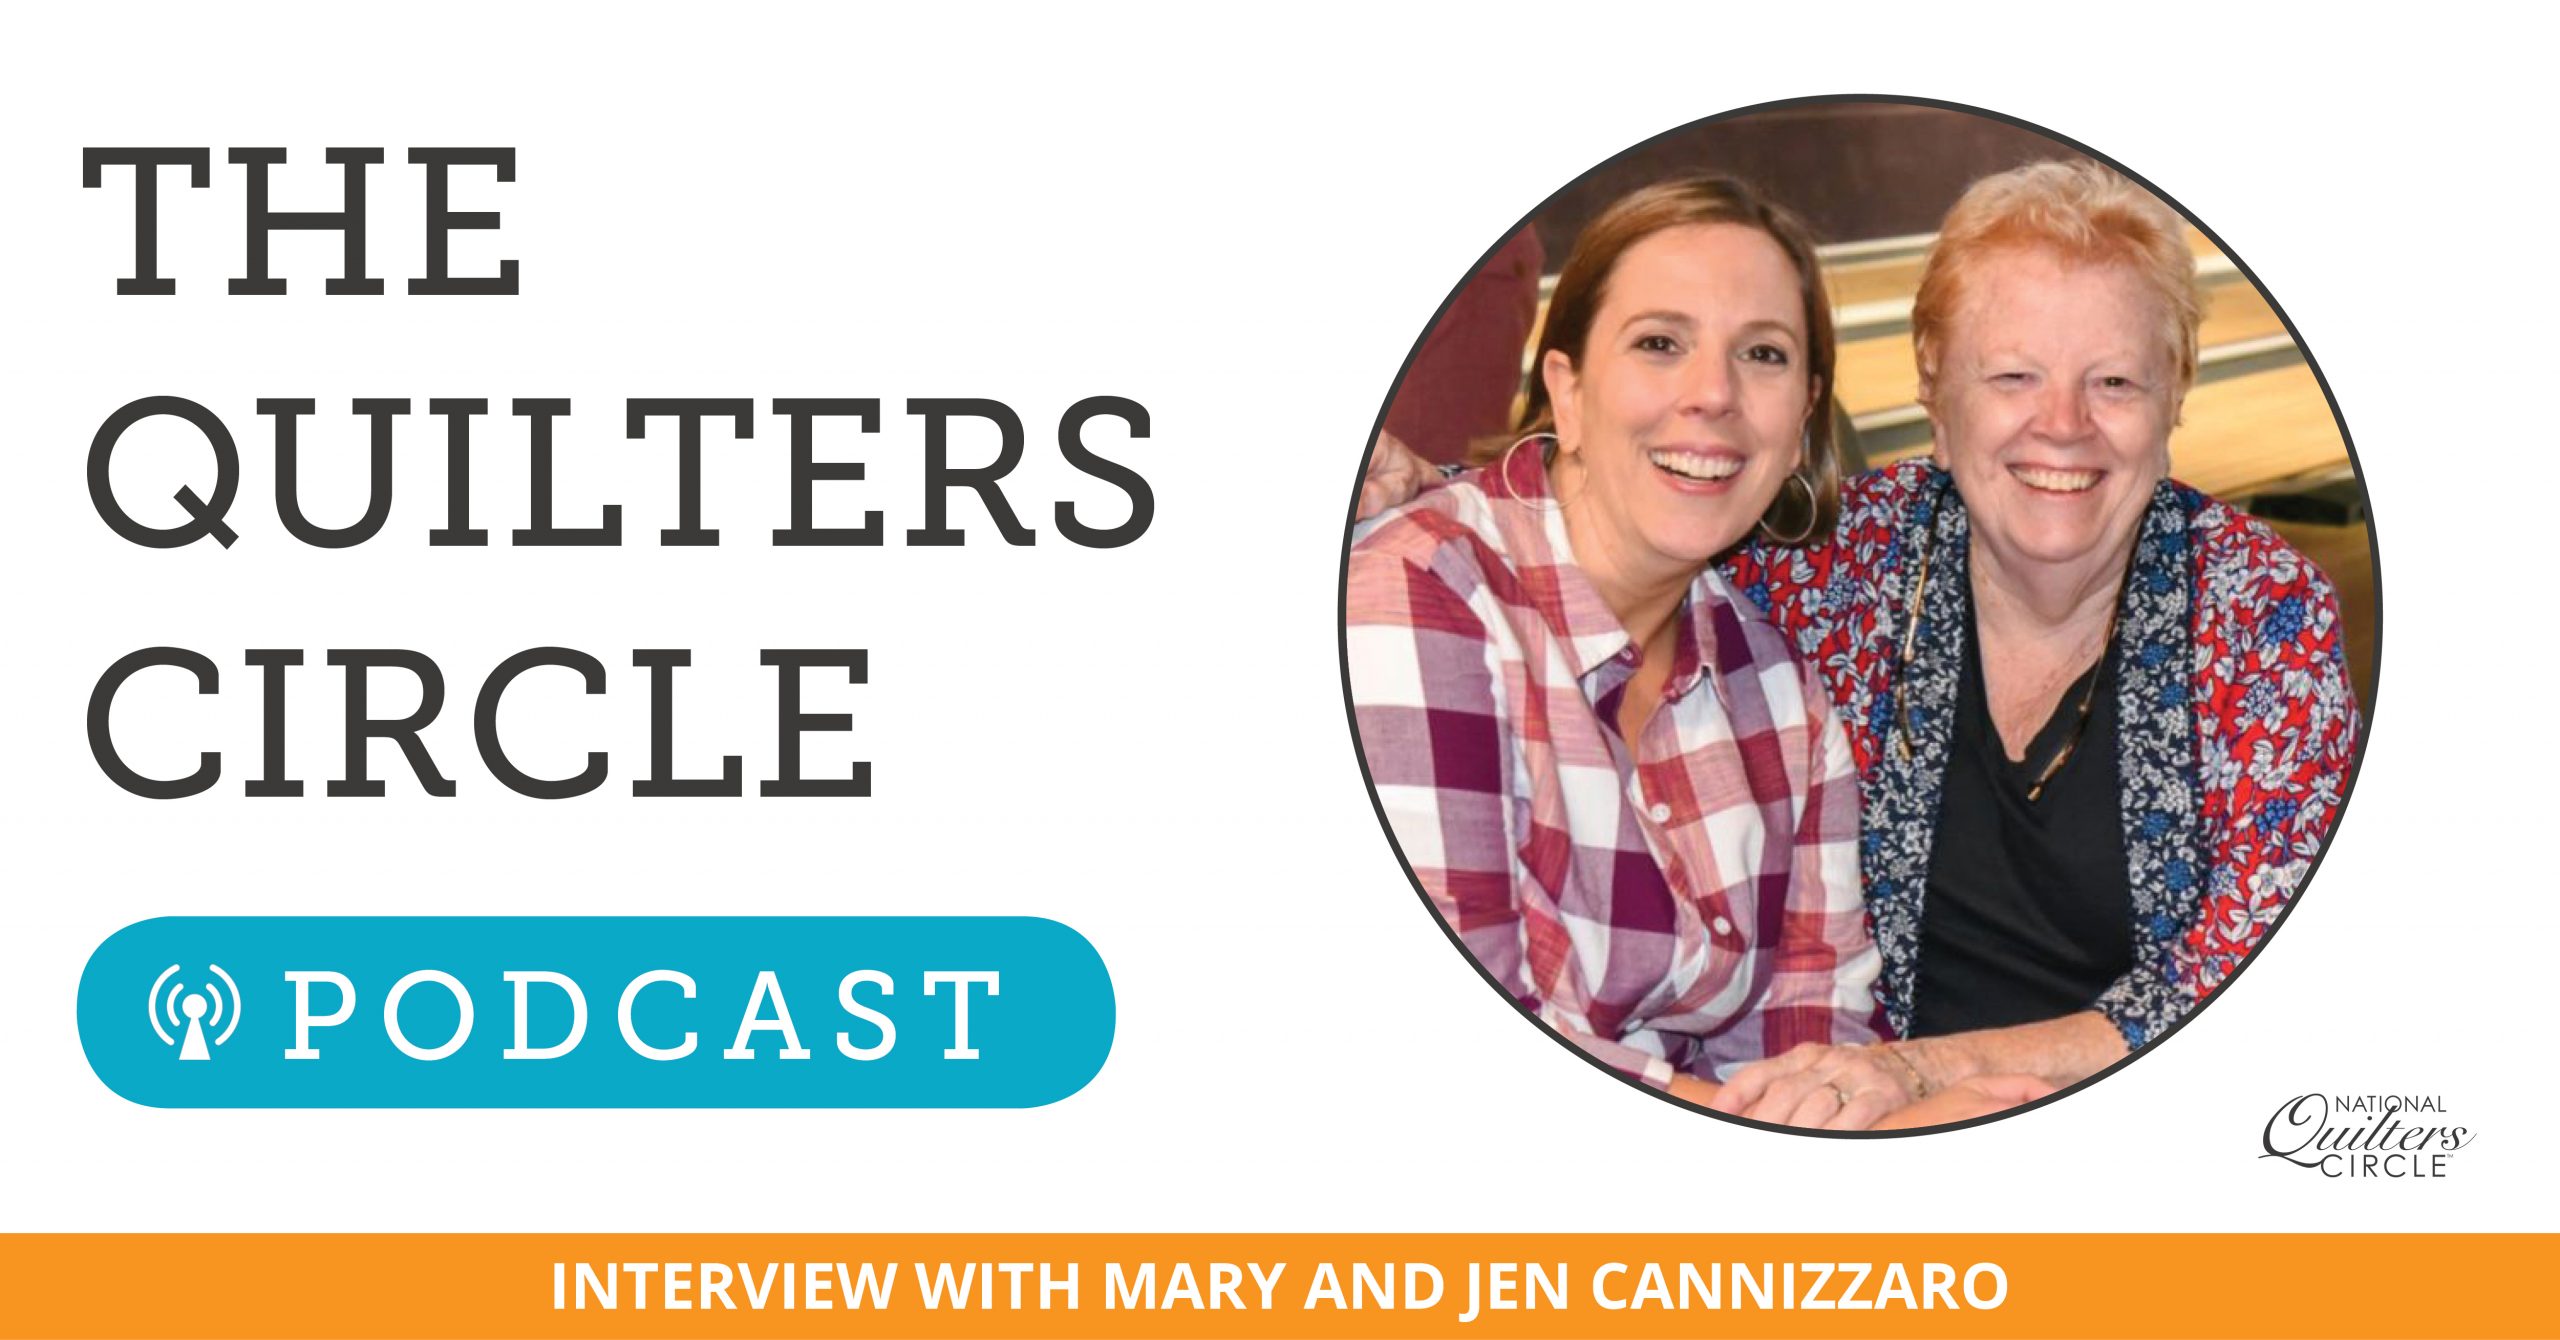 The Quilter's Circle Podcast text with two women smiling